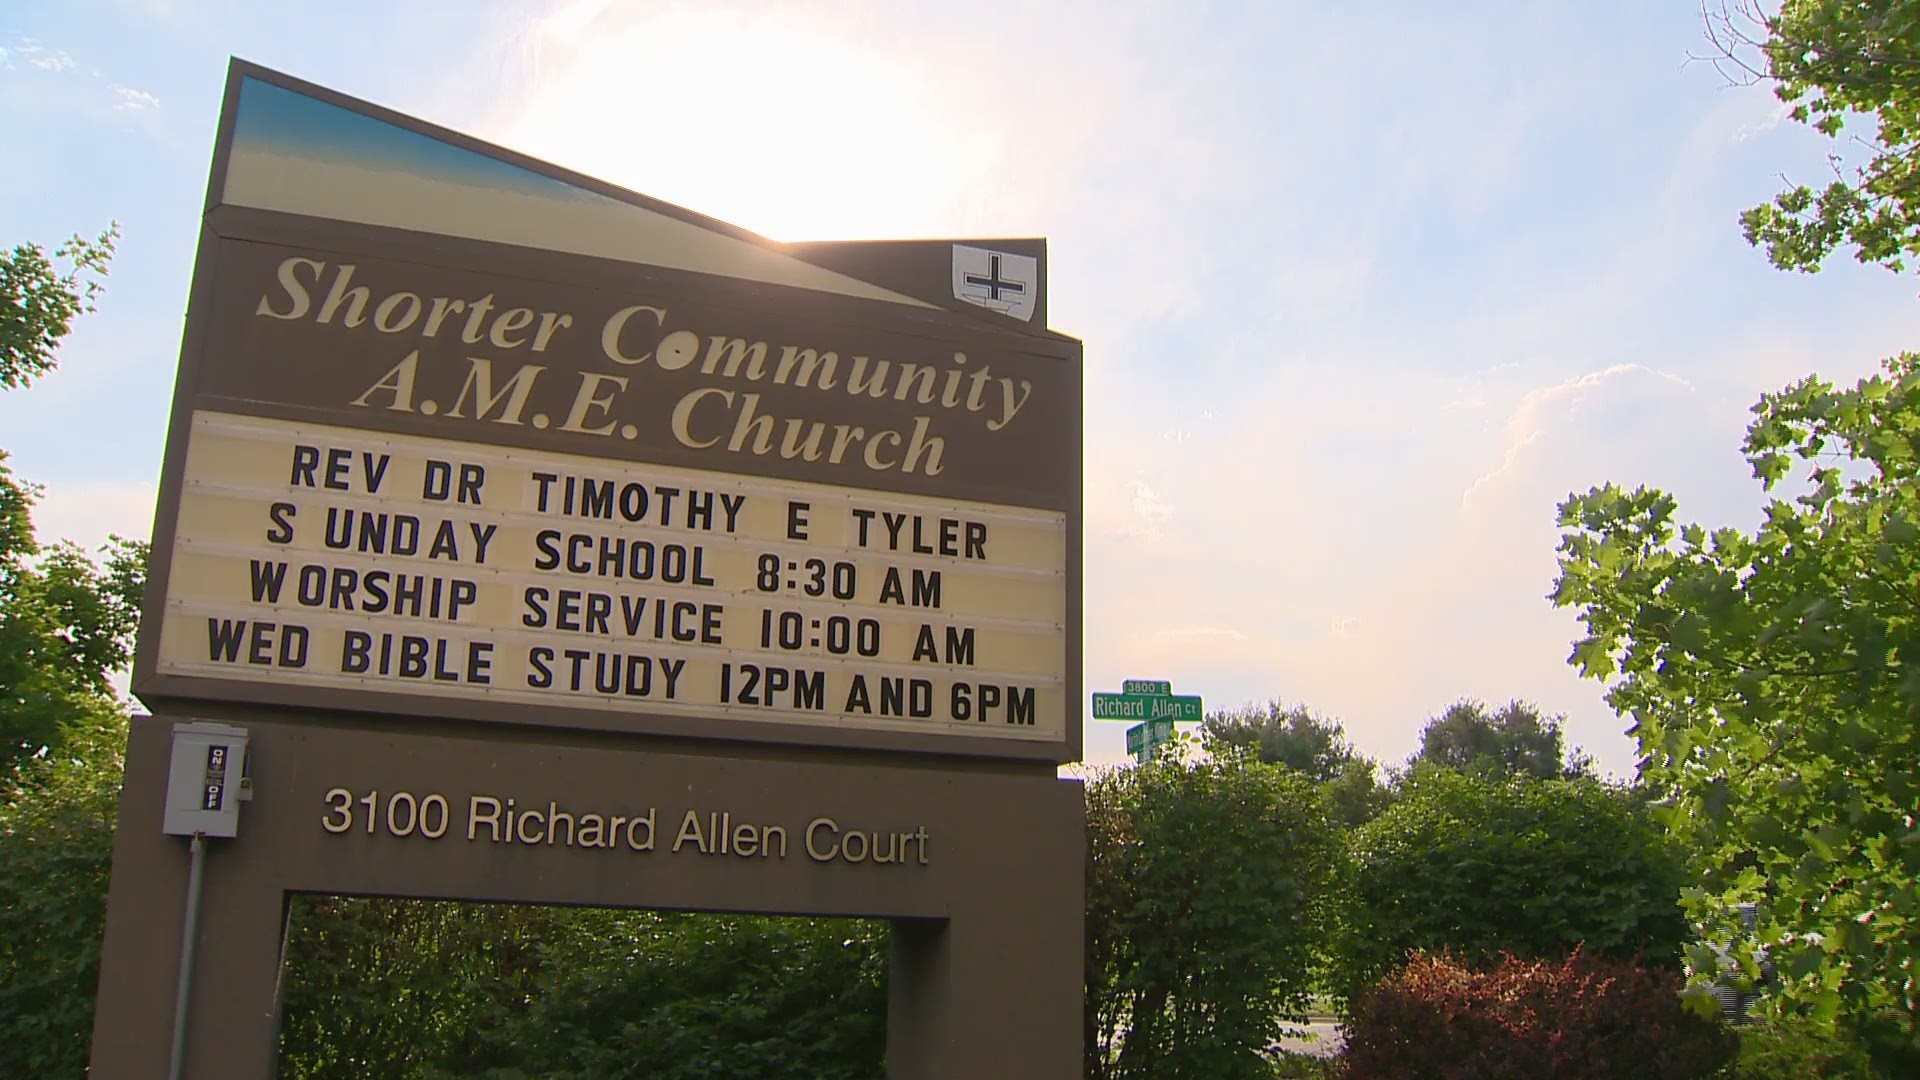 Dr. Timothy Tyler is the pastor at Shorter Community AME Church in Denver. He said a name change is a symbolic first step, changing hearts and minds will take longer